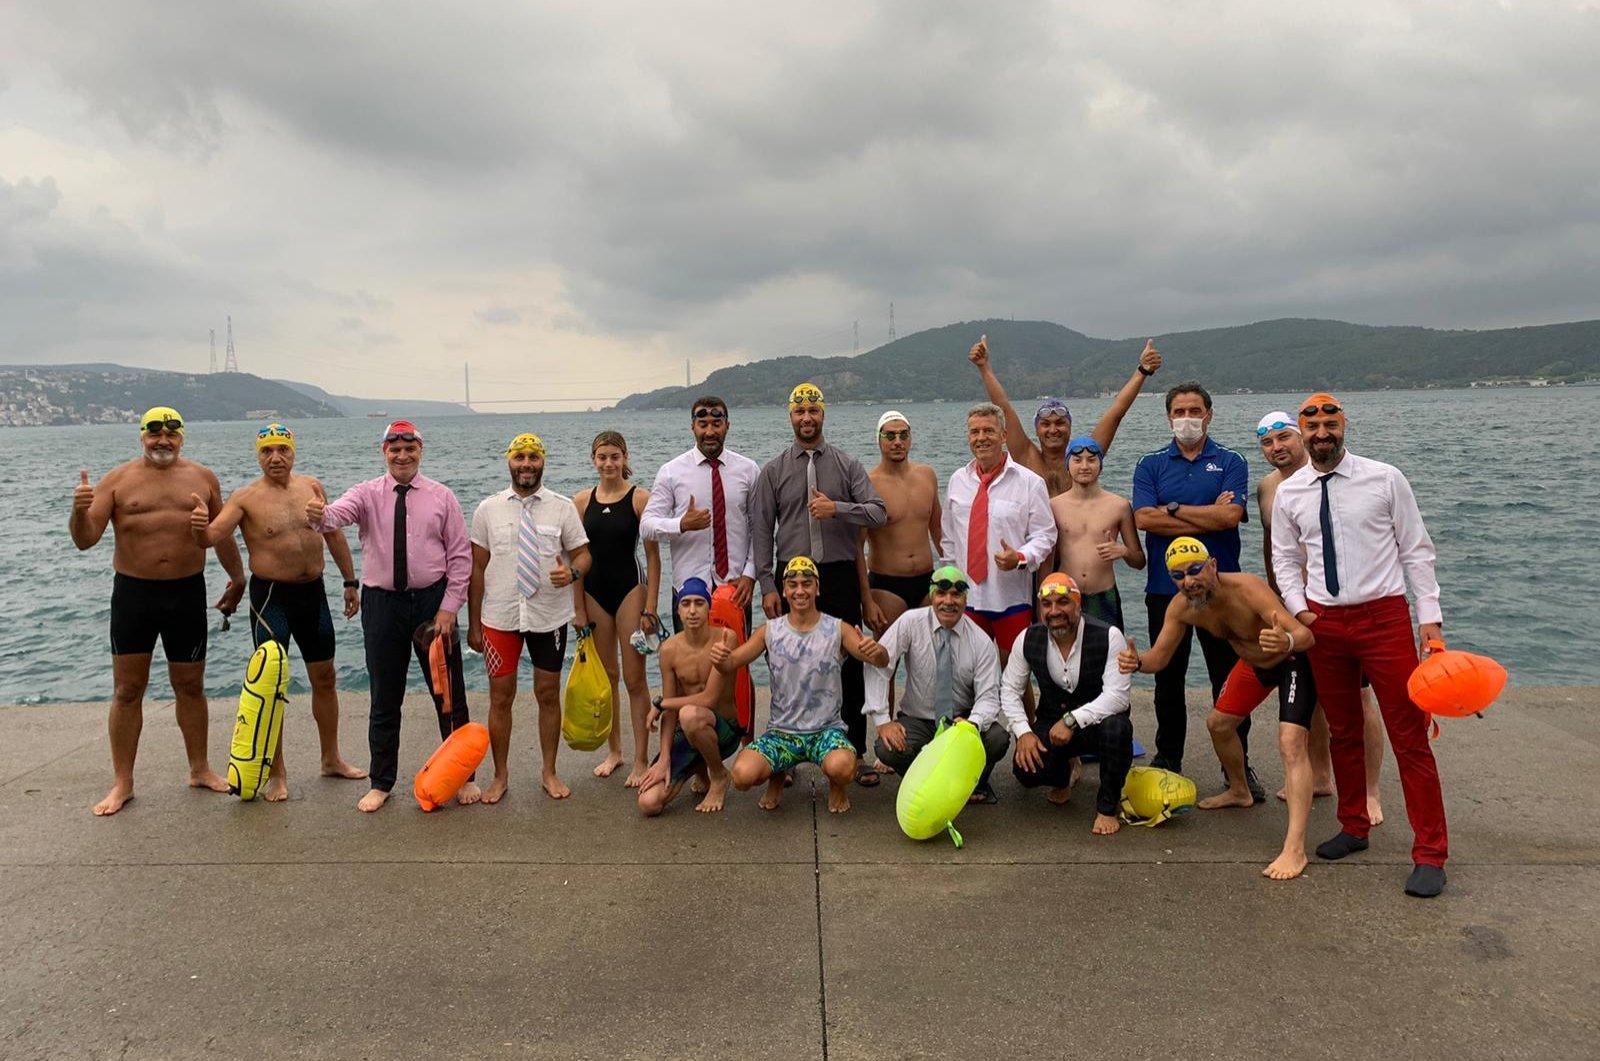 The "Masters of Bosporus" swimming group poses for a photo before their swim in the Bosporus, Istanbul, Turkey, Sept. 13, 2020. (DHA Photo)